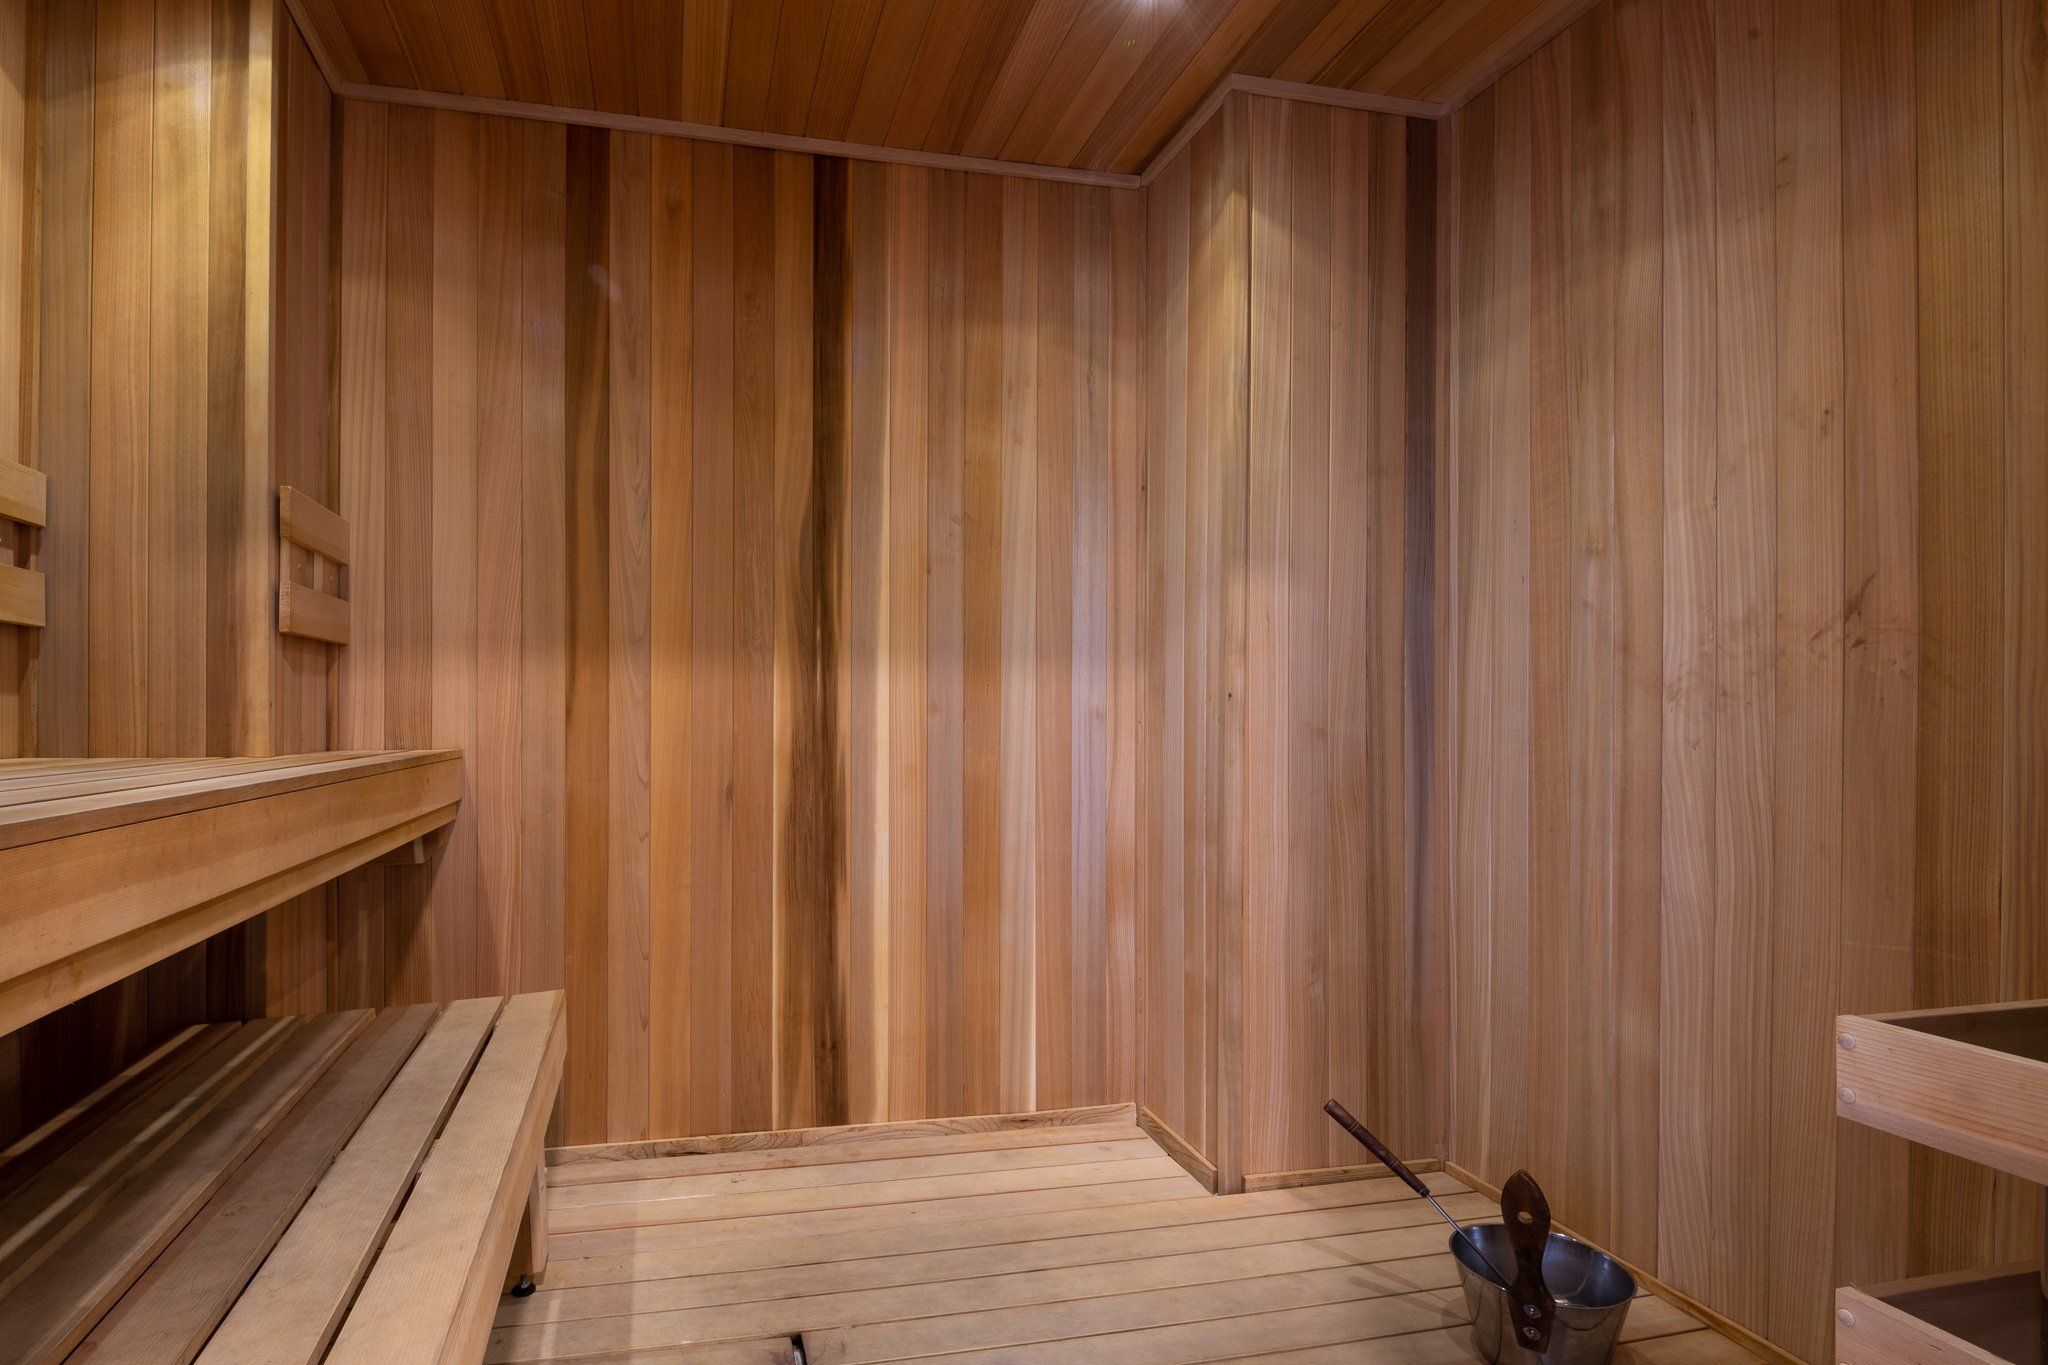 Sauna room with bench and wood flooring and walls